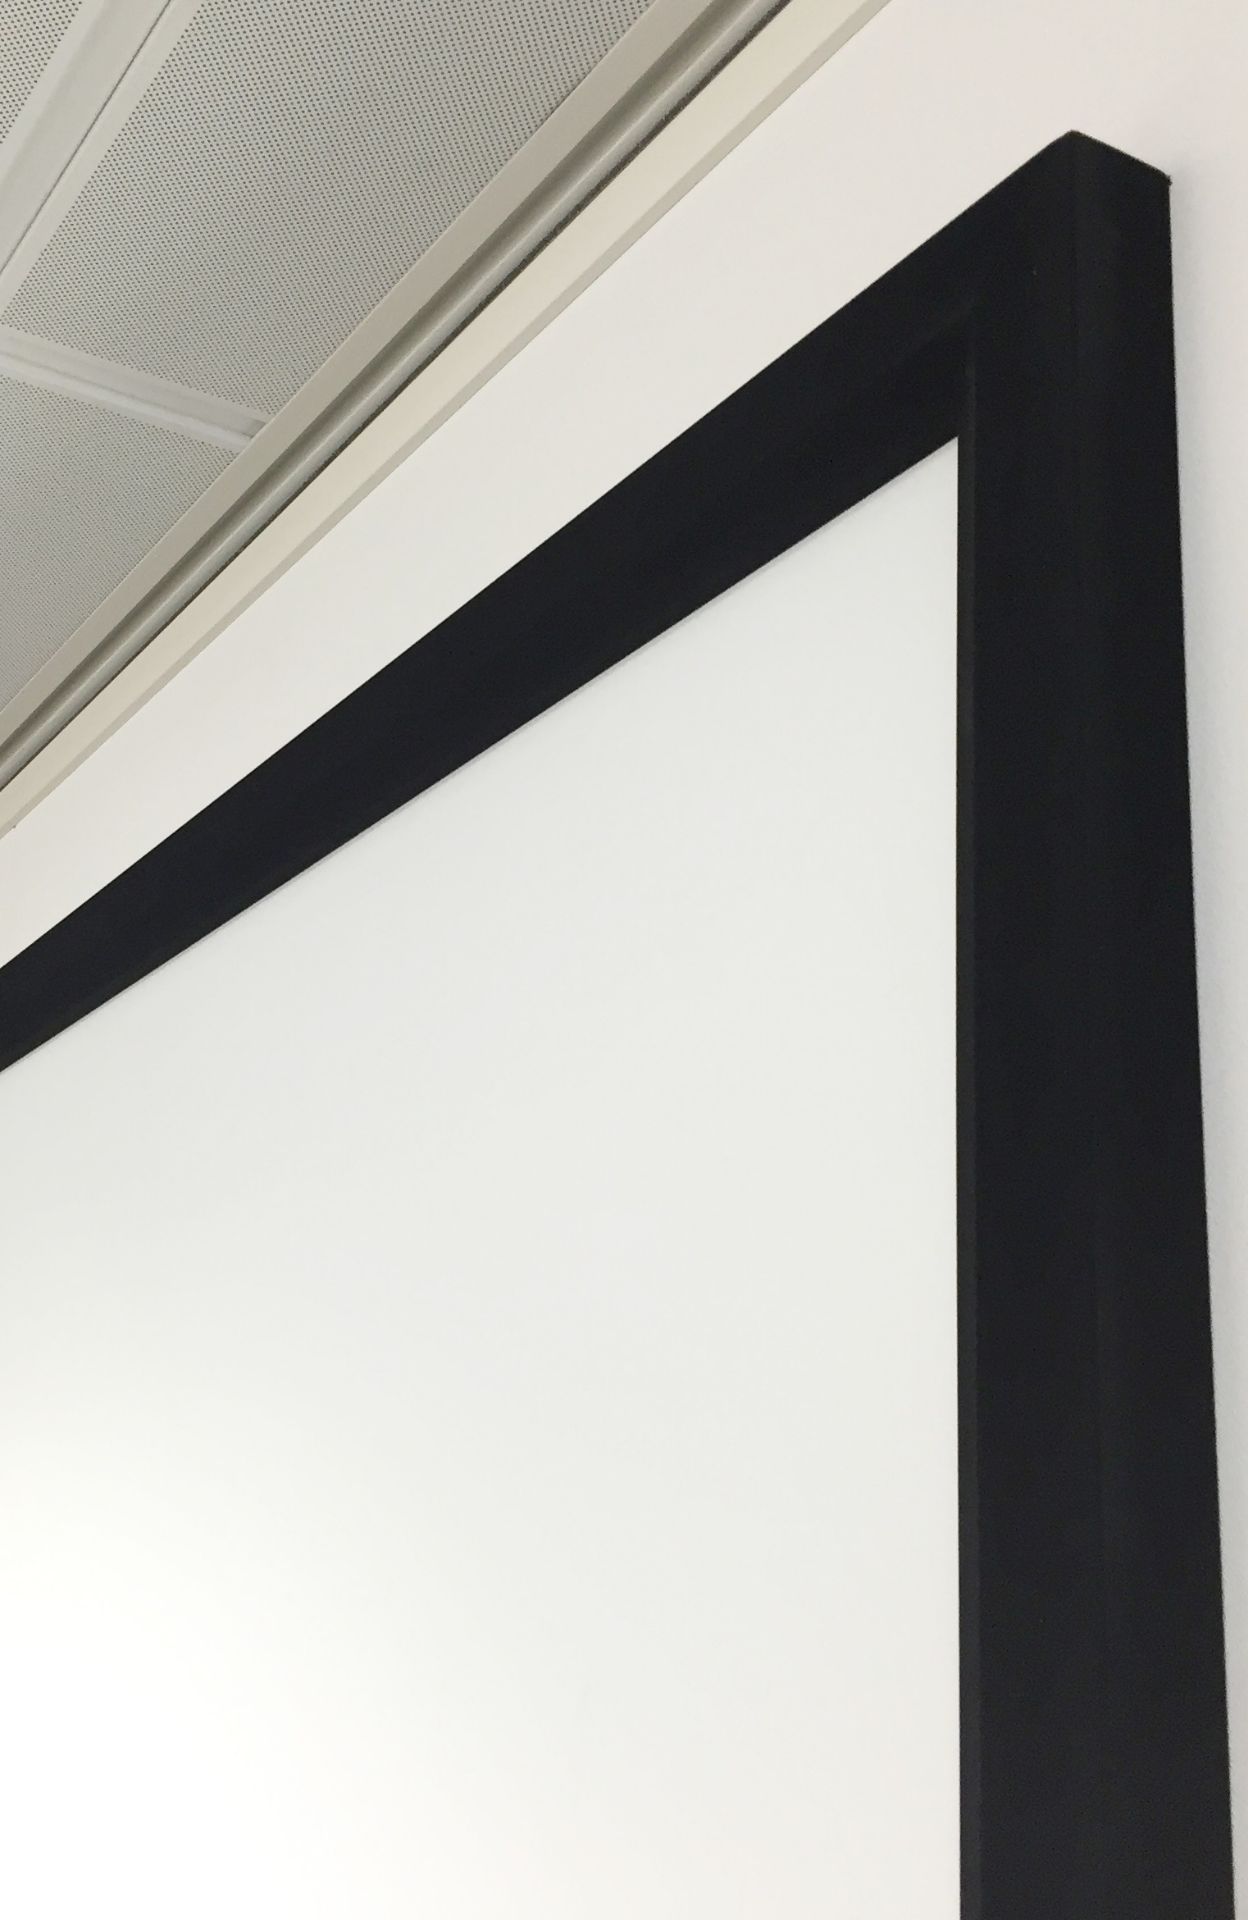 1 x Fixed Frame CINEMATIC Projection Screen - Large Size With Deep Black Velvet Fixed Surround - Image 3 of 5